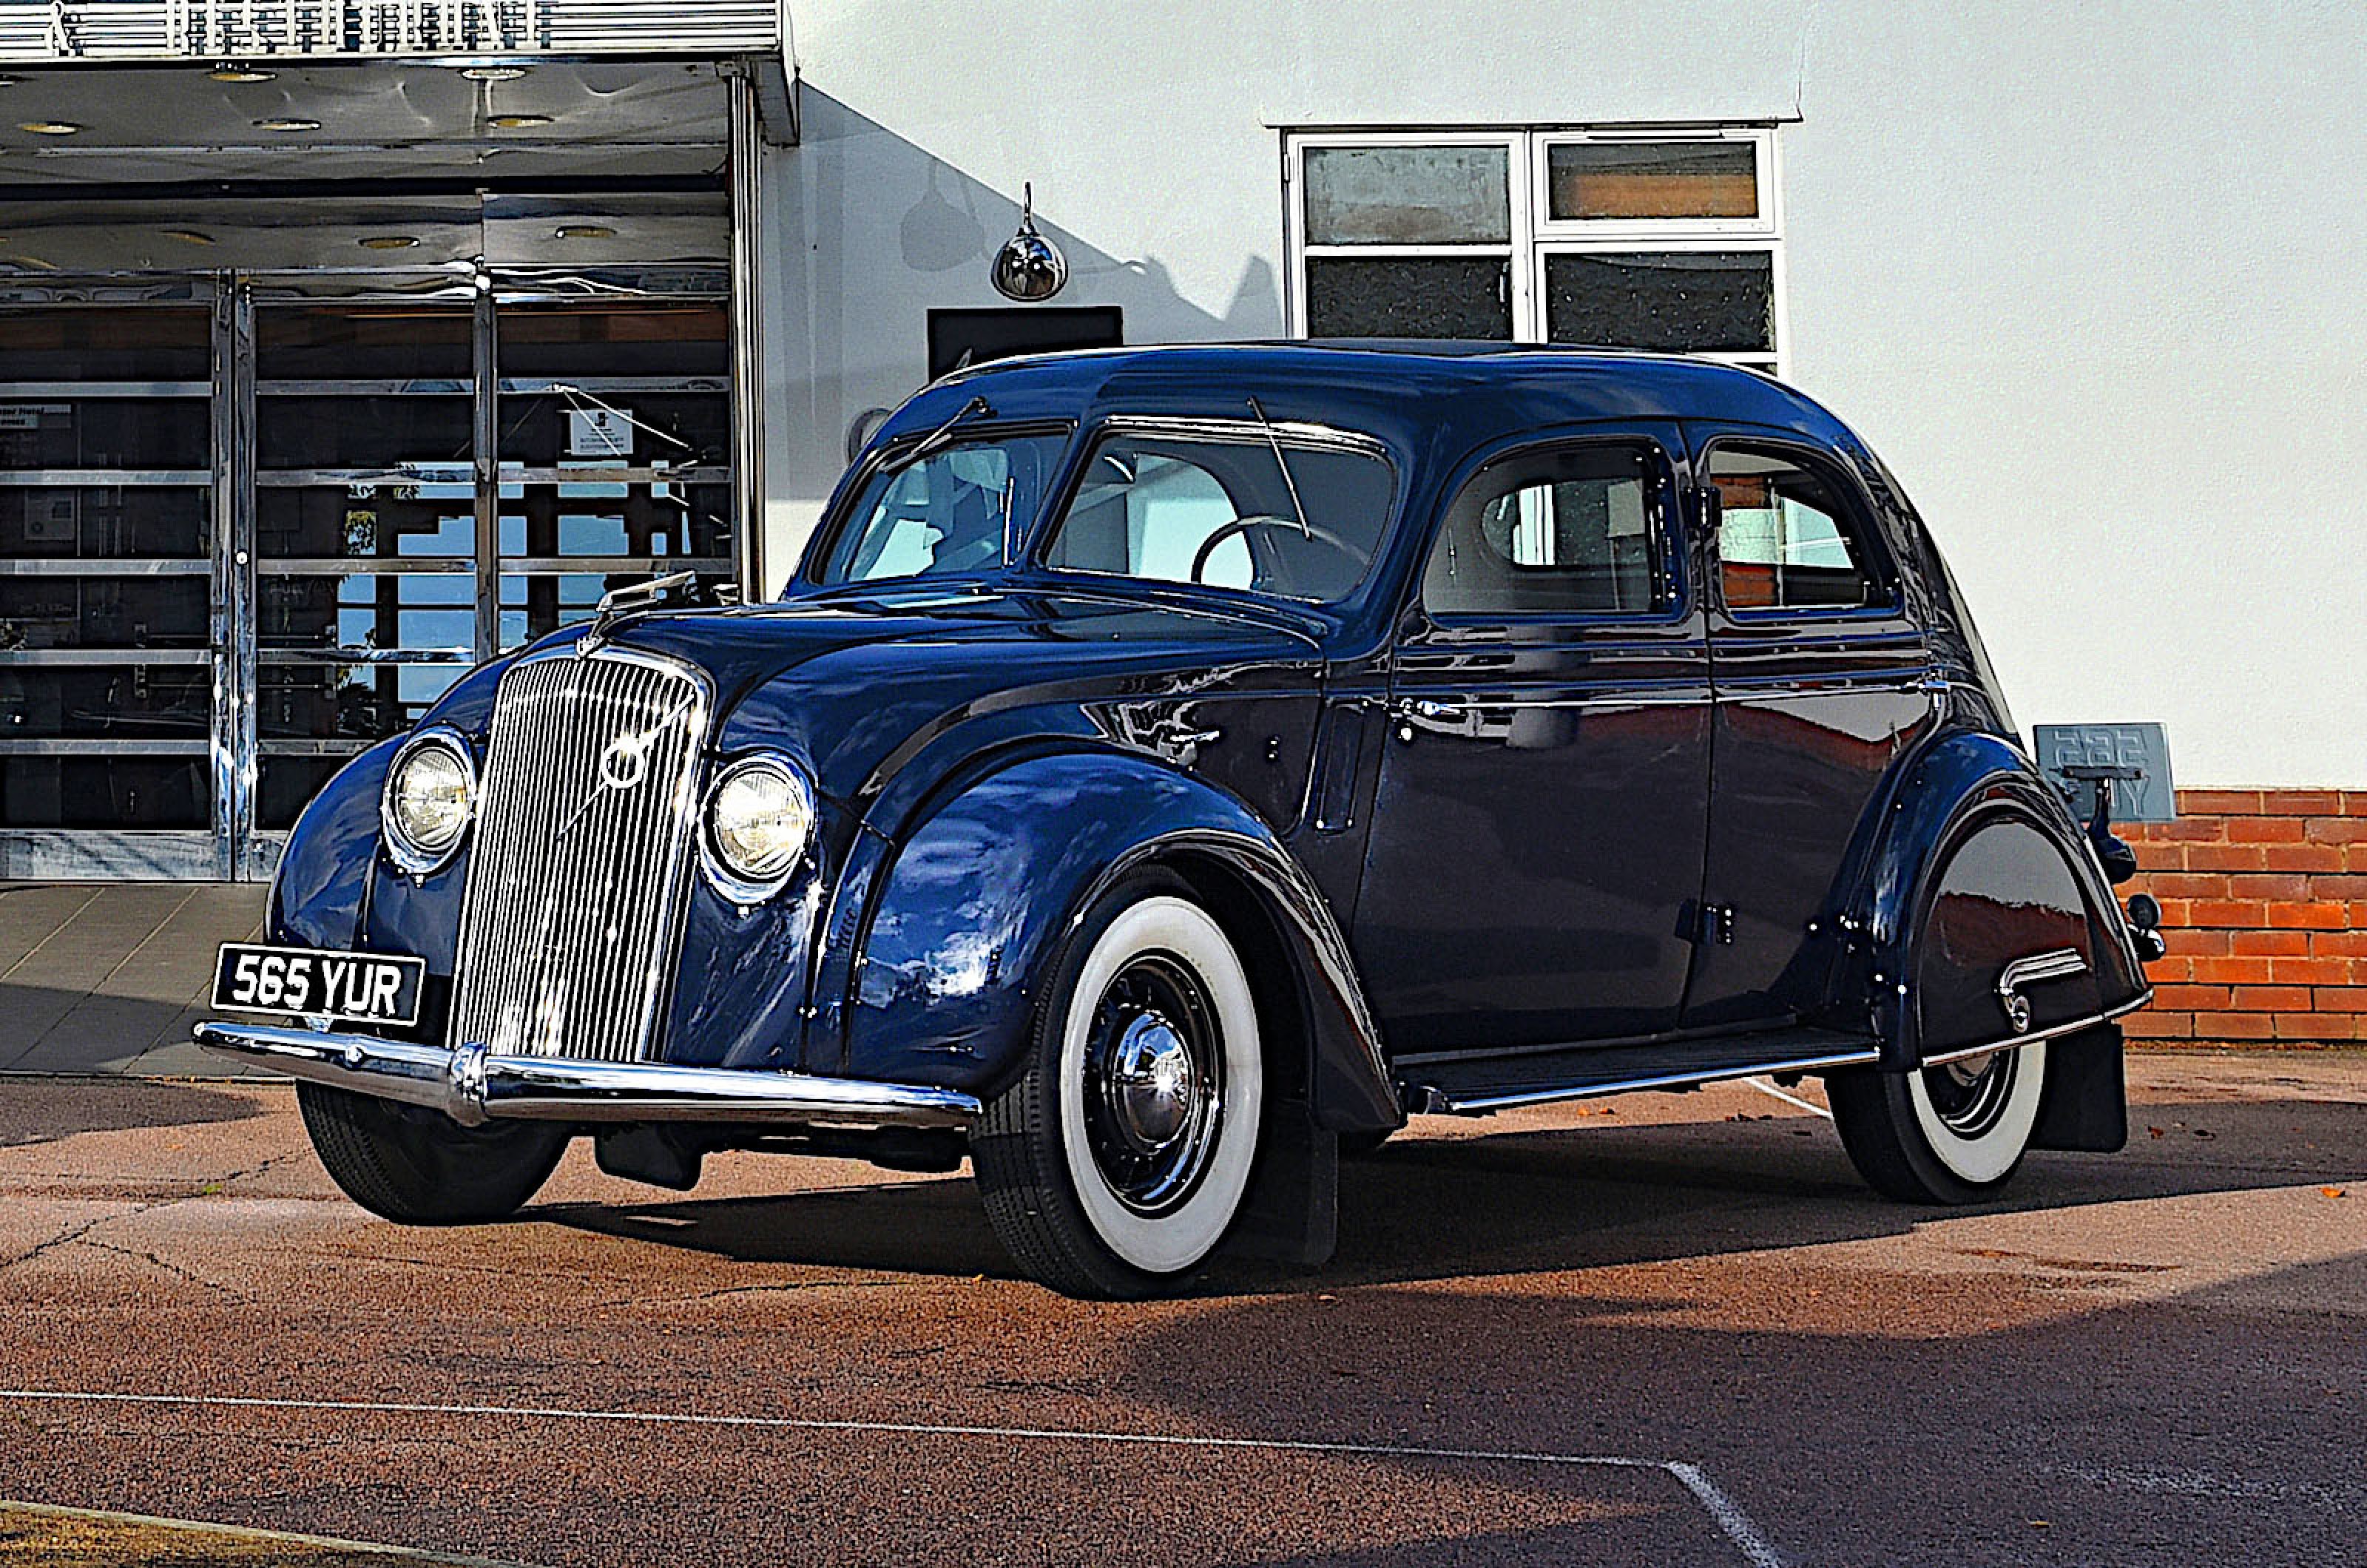 <p>Volvo insists that its streamlined Carioca model was not a copy of the Chrysler Airflow, but there’s strong evidence that it had American influence all the same.</p>  <p>The key figure here is the car’s designer, Ivan Örnberg, who joined Volvo in 1931 after working for Hupp in Detroit.</p>  <p>Hupp was almost certainly thinking about streamlining while Örnberg was still there, since it put an aerodynamic Hupmobile on sale in the 1934 model year.</p>  <p>Both the PV36 Carioca and, to a lesser but still noticeable extent, Volvo’s very odd-looking Venus Bilo concept of 1933 resemble the Raymond Loewy-designed Hupmobile.</p>  <p>The shape of the Venus Bilo is credited to Gustaf Ericsson rather than to Örnberg, who was nevertheless definitely on the premises when it was being created.</p>